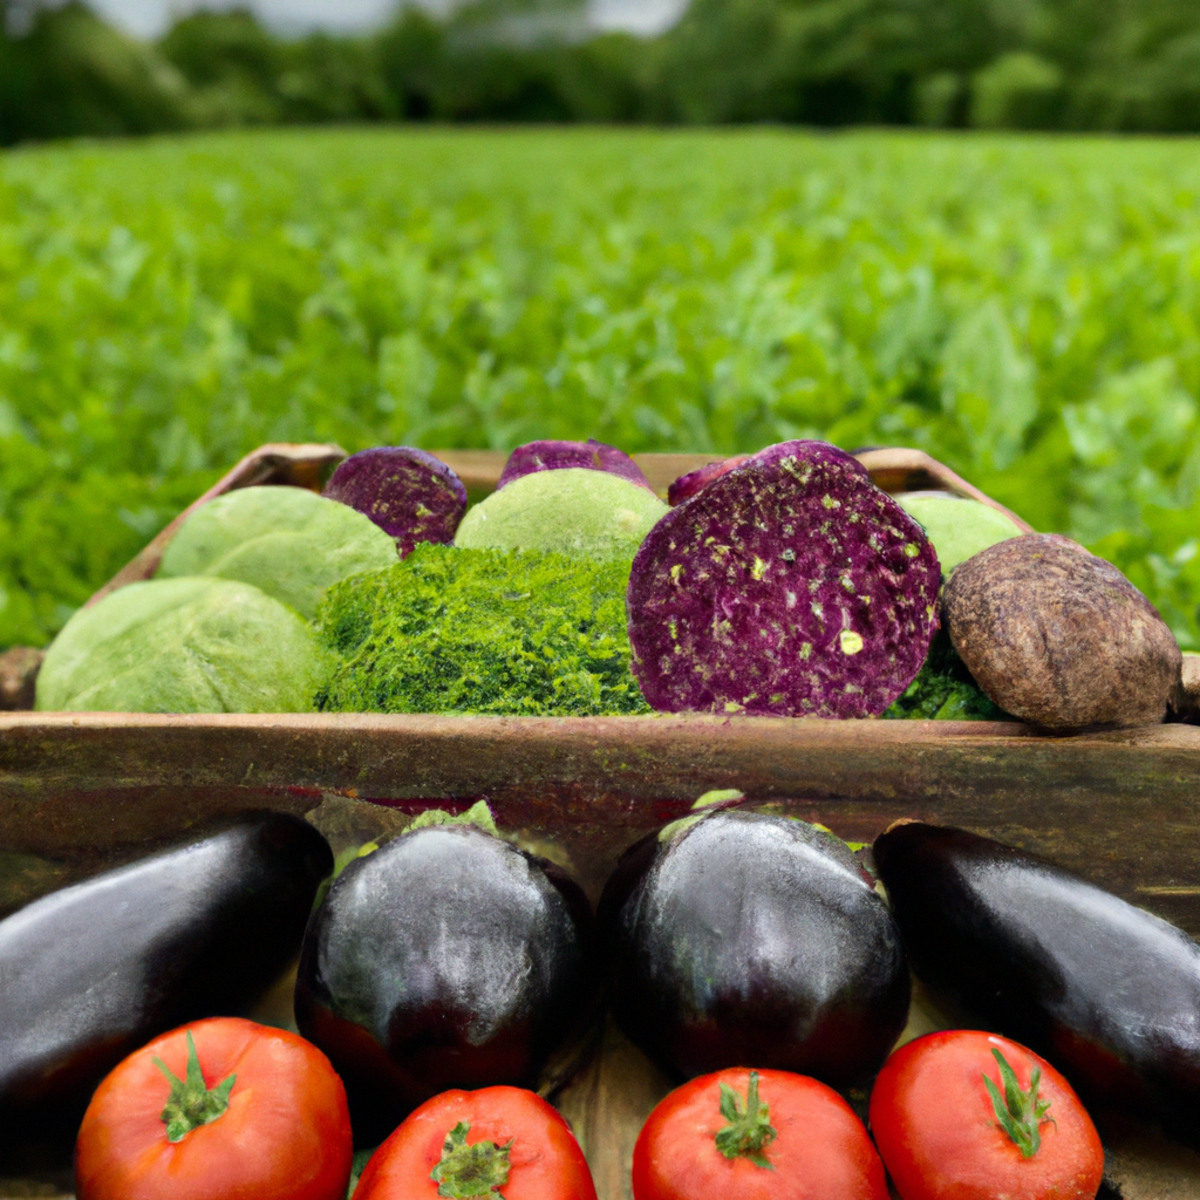 The photo depicts a colorful array of fresh produce, including vibrant red tomatoes, leafy green lettuce, and plump purple eggplants, arranged in a rustic wooden crate. In the background, a lush green field stretches out, dotted with rows of crops and a few grazing cows. The image captures the essence of sustainable farming, showcasing the beauty and abundance of organic foods while highlighting the importance of protecting the environment for future generations.